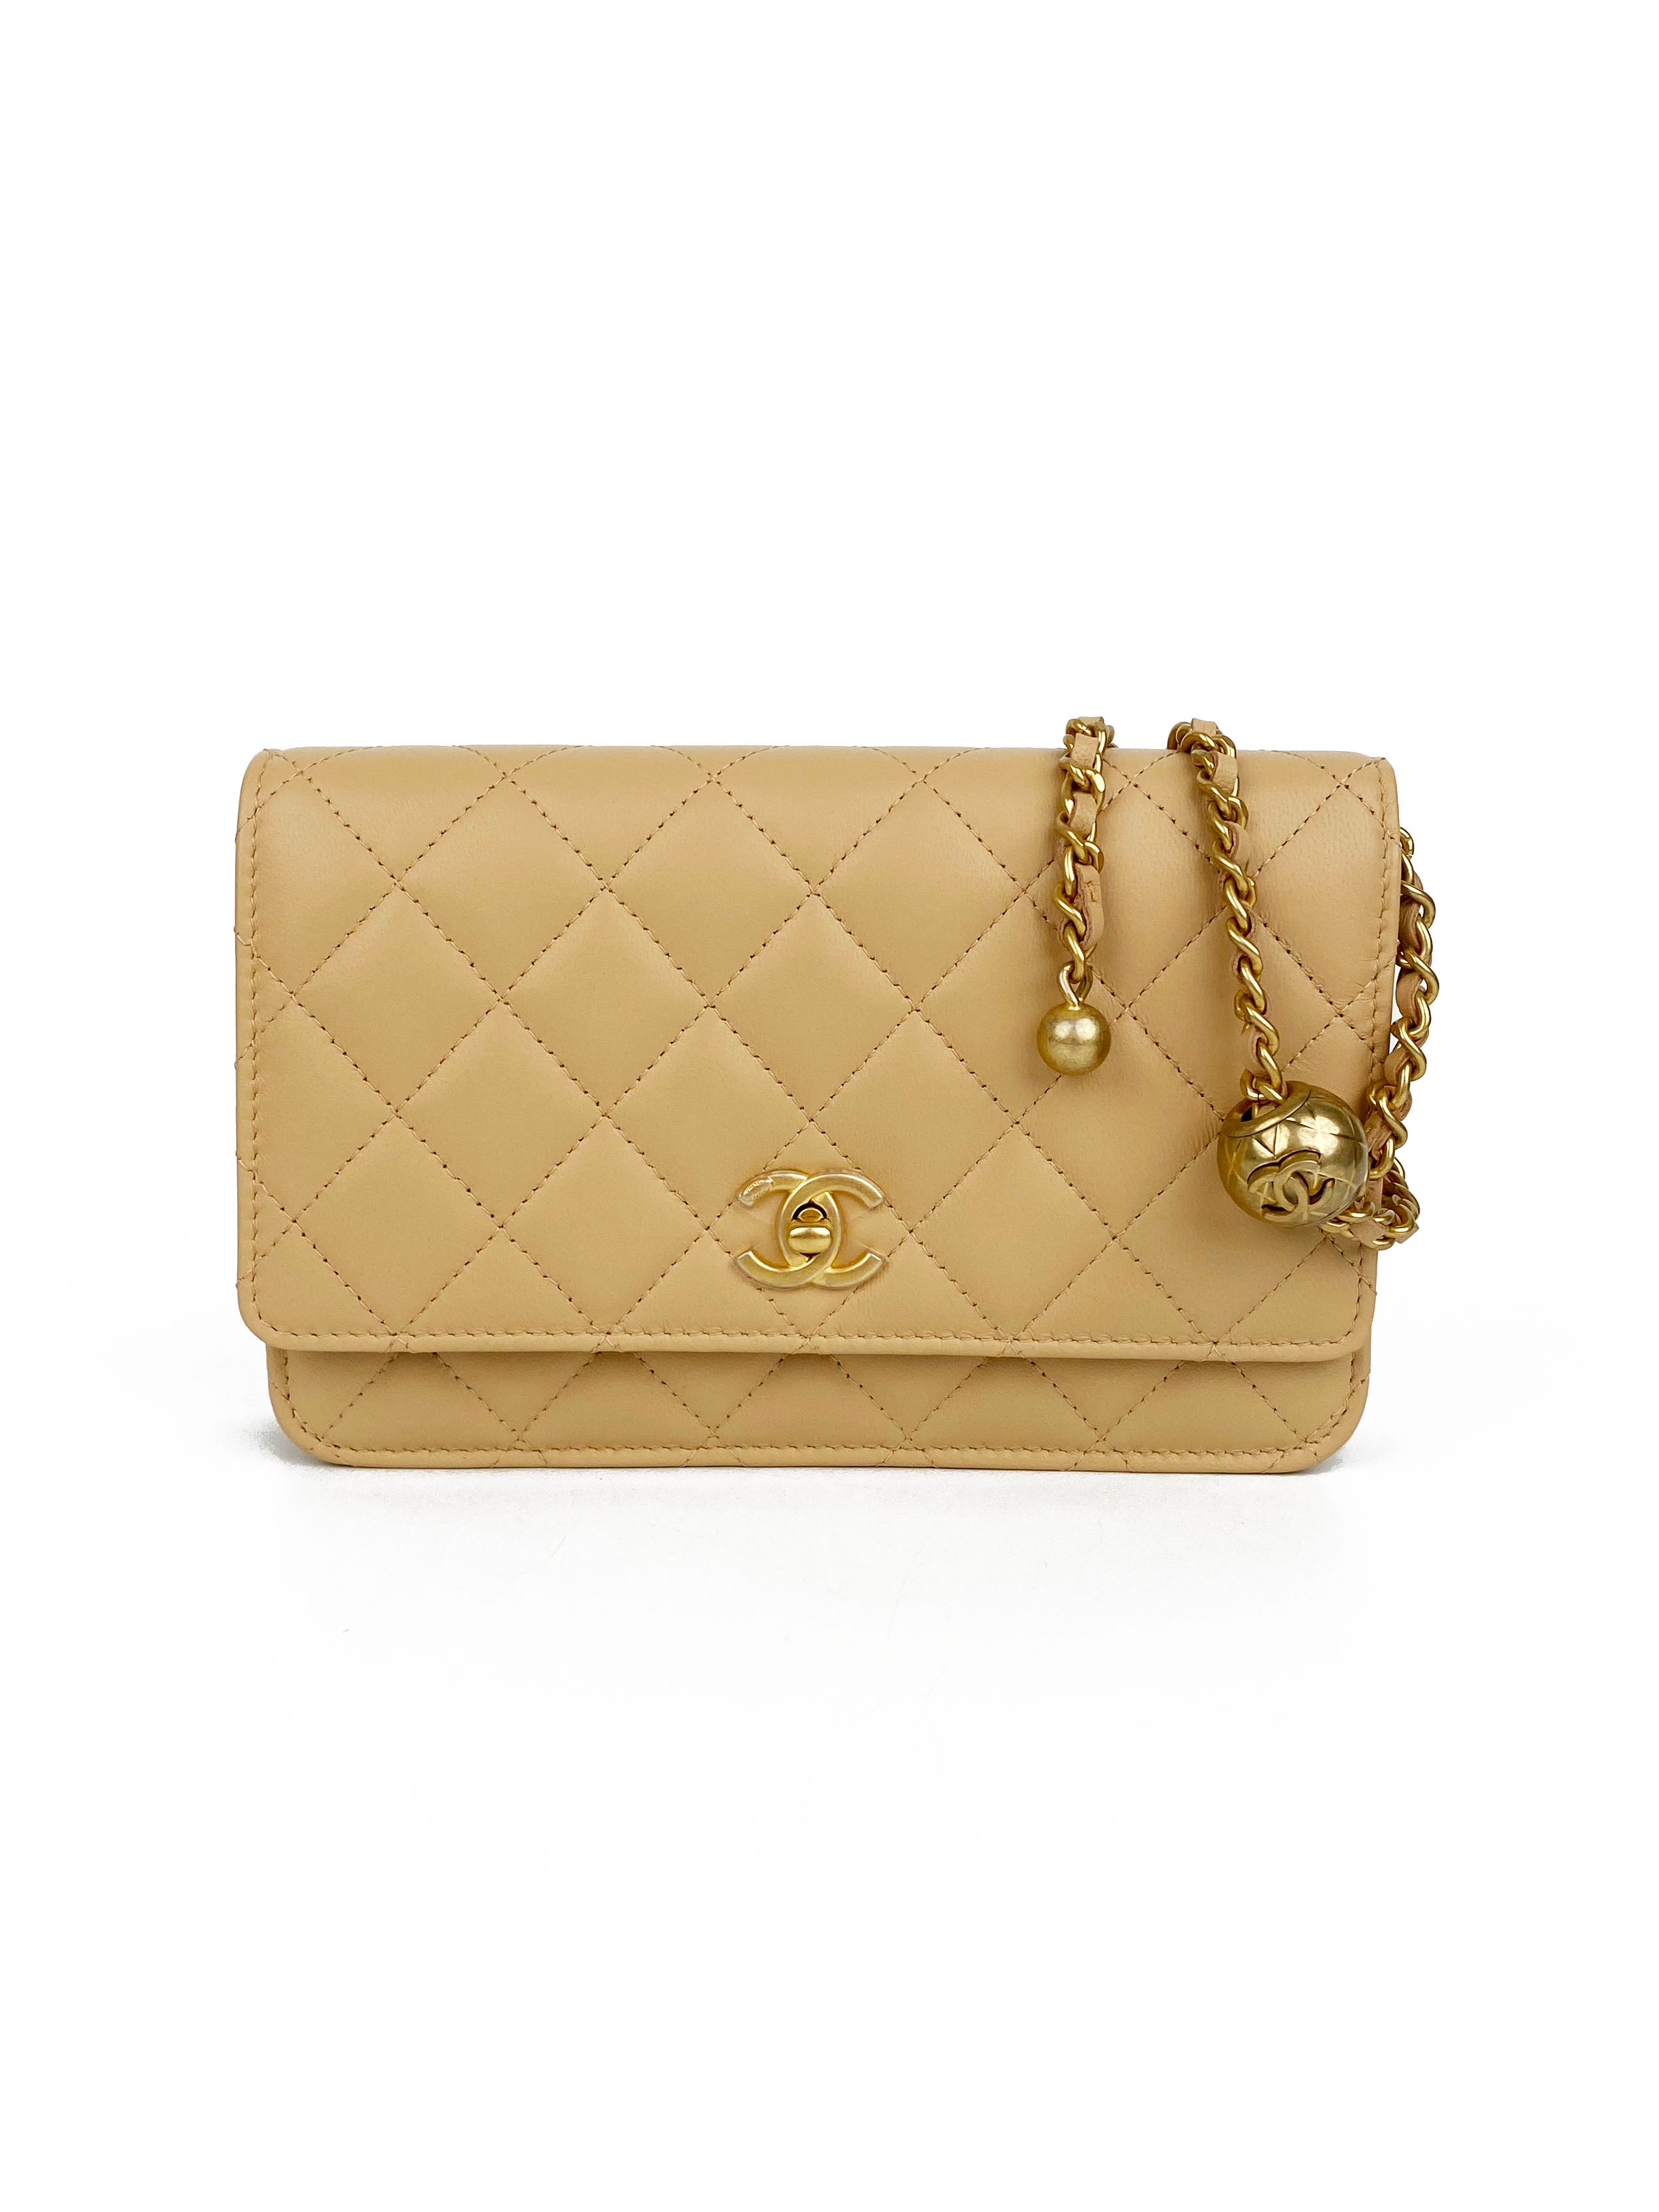 Chanel Beige Wallet on Chain with Pearl Crush